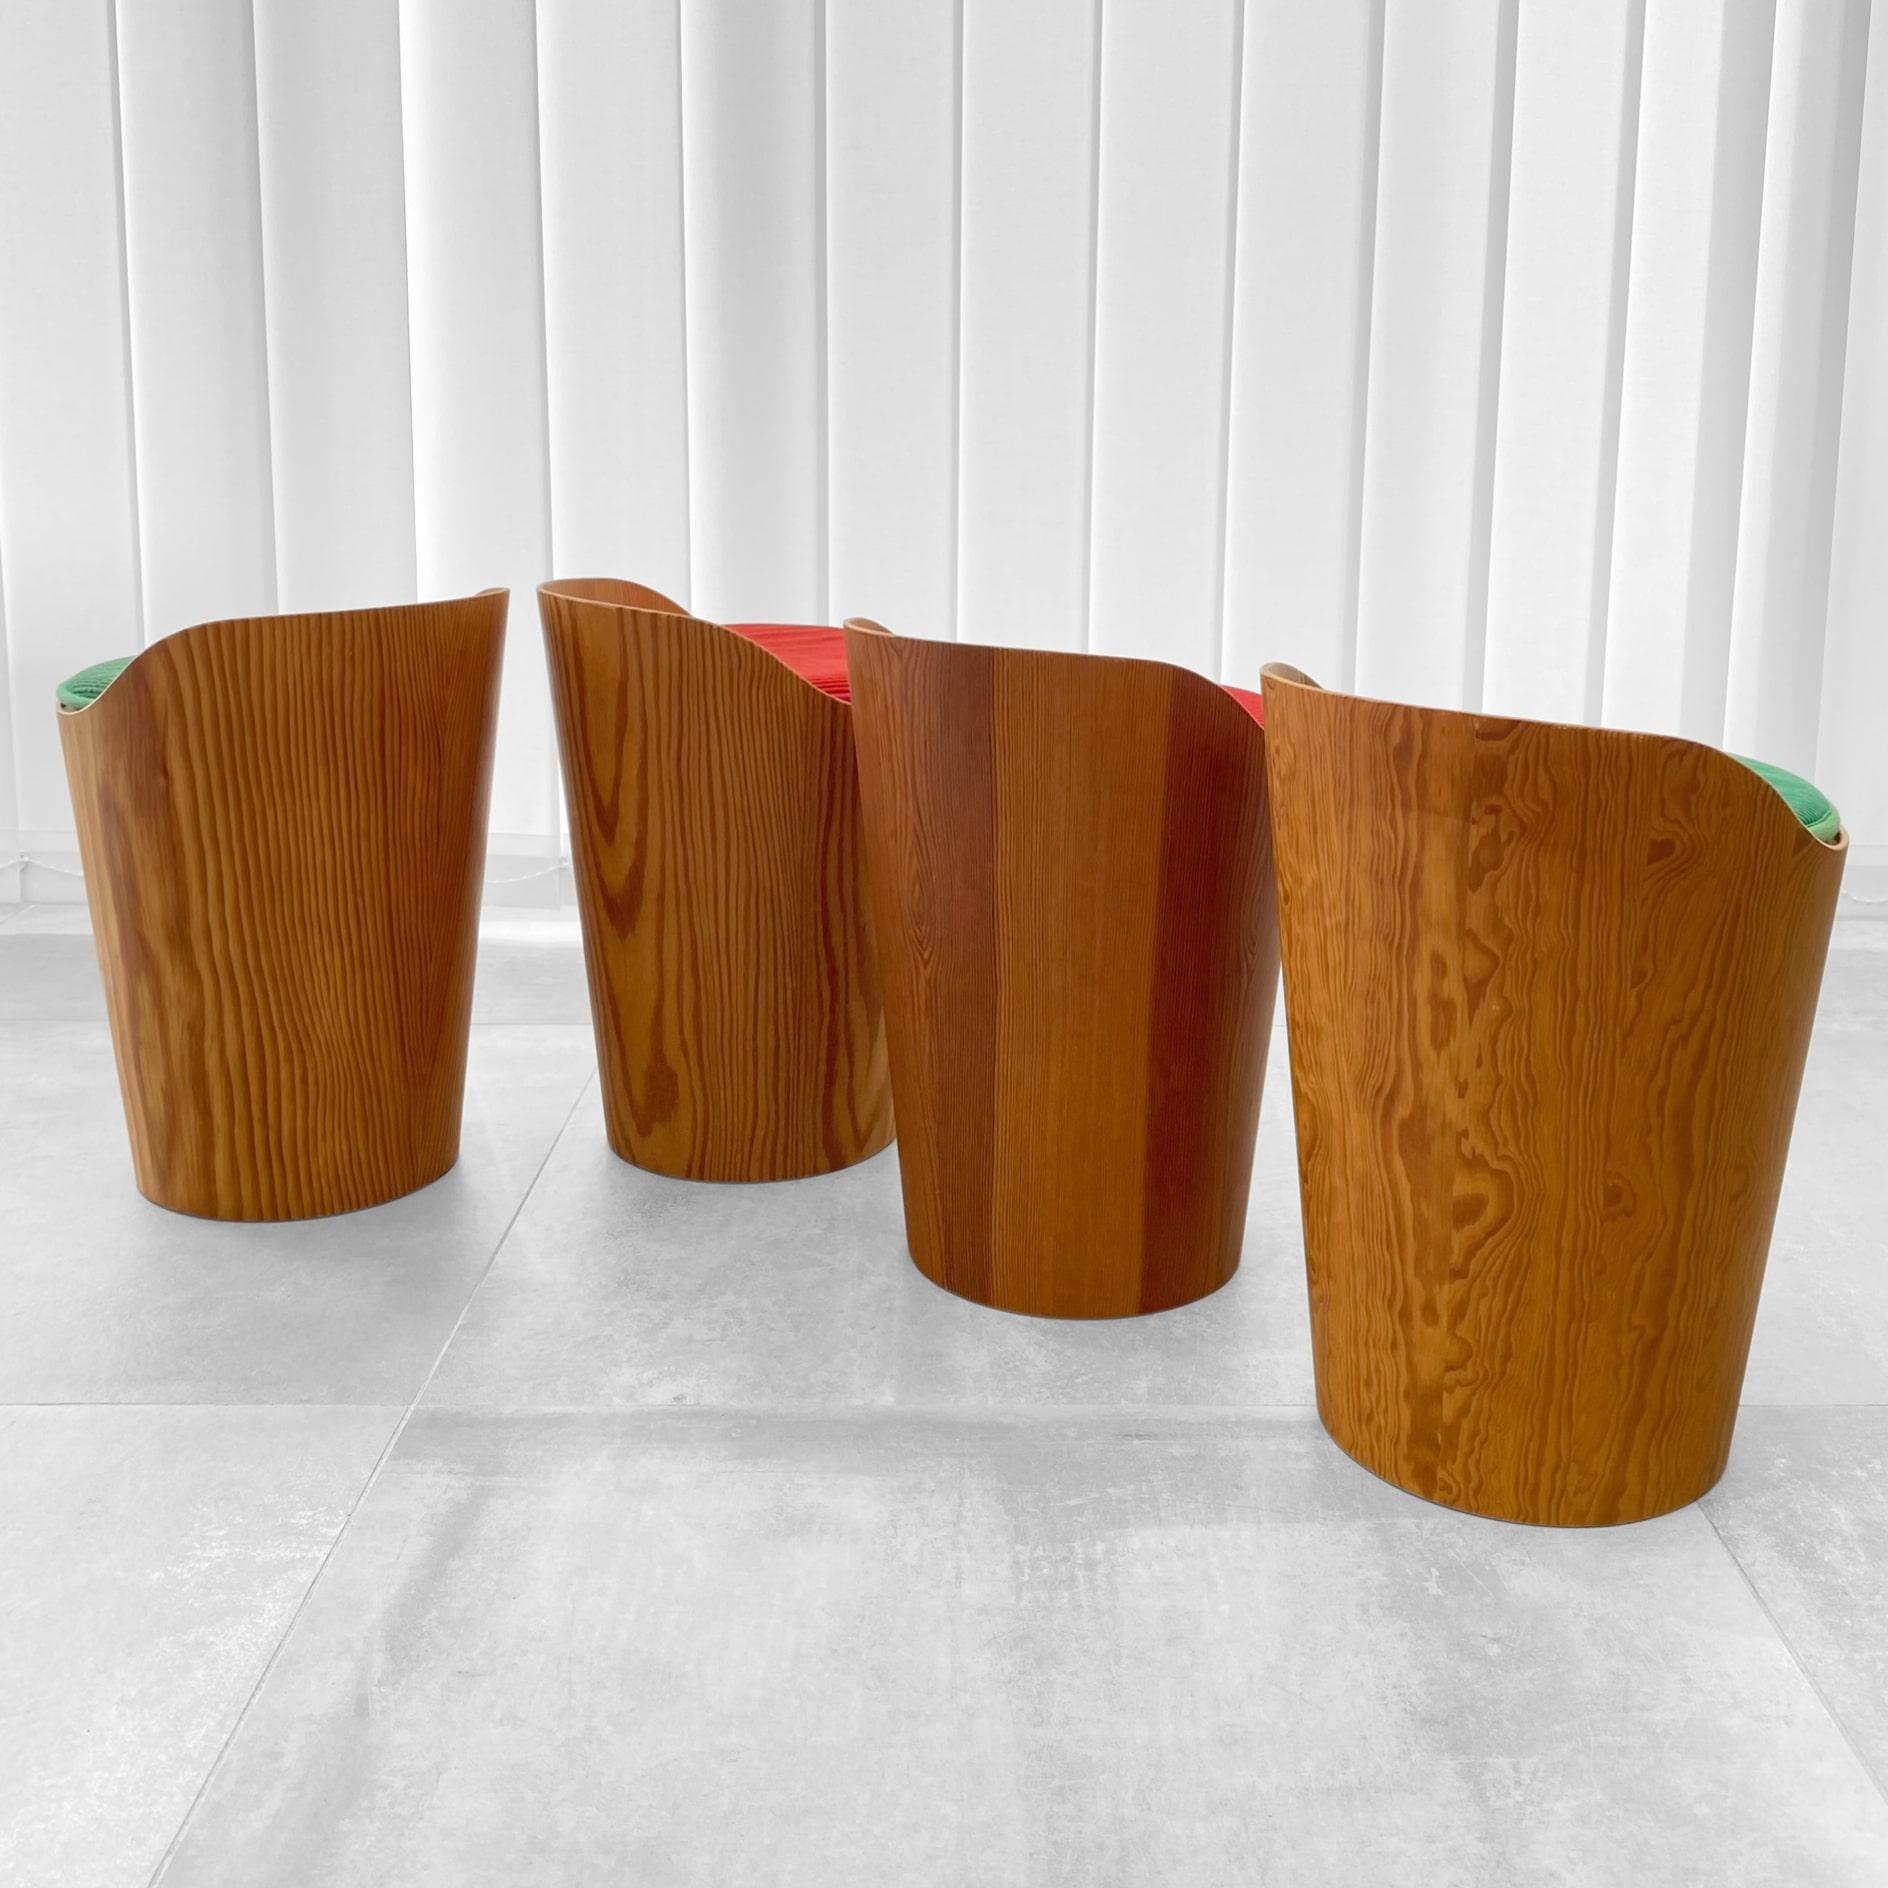 Swedish modernist pinewood stools by Martin Åberg, Servex, 1960s In Good Condition For Sale In Forserum, SE